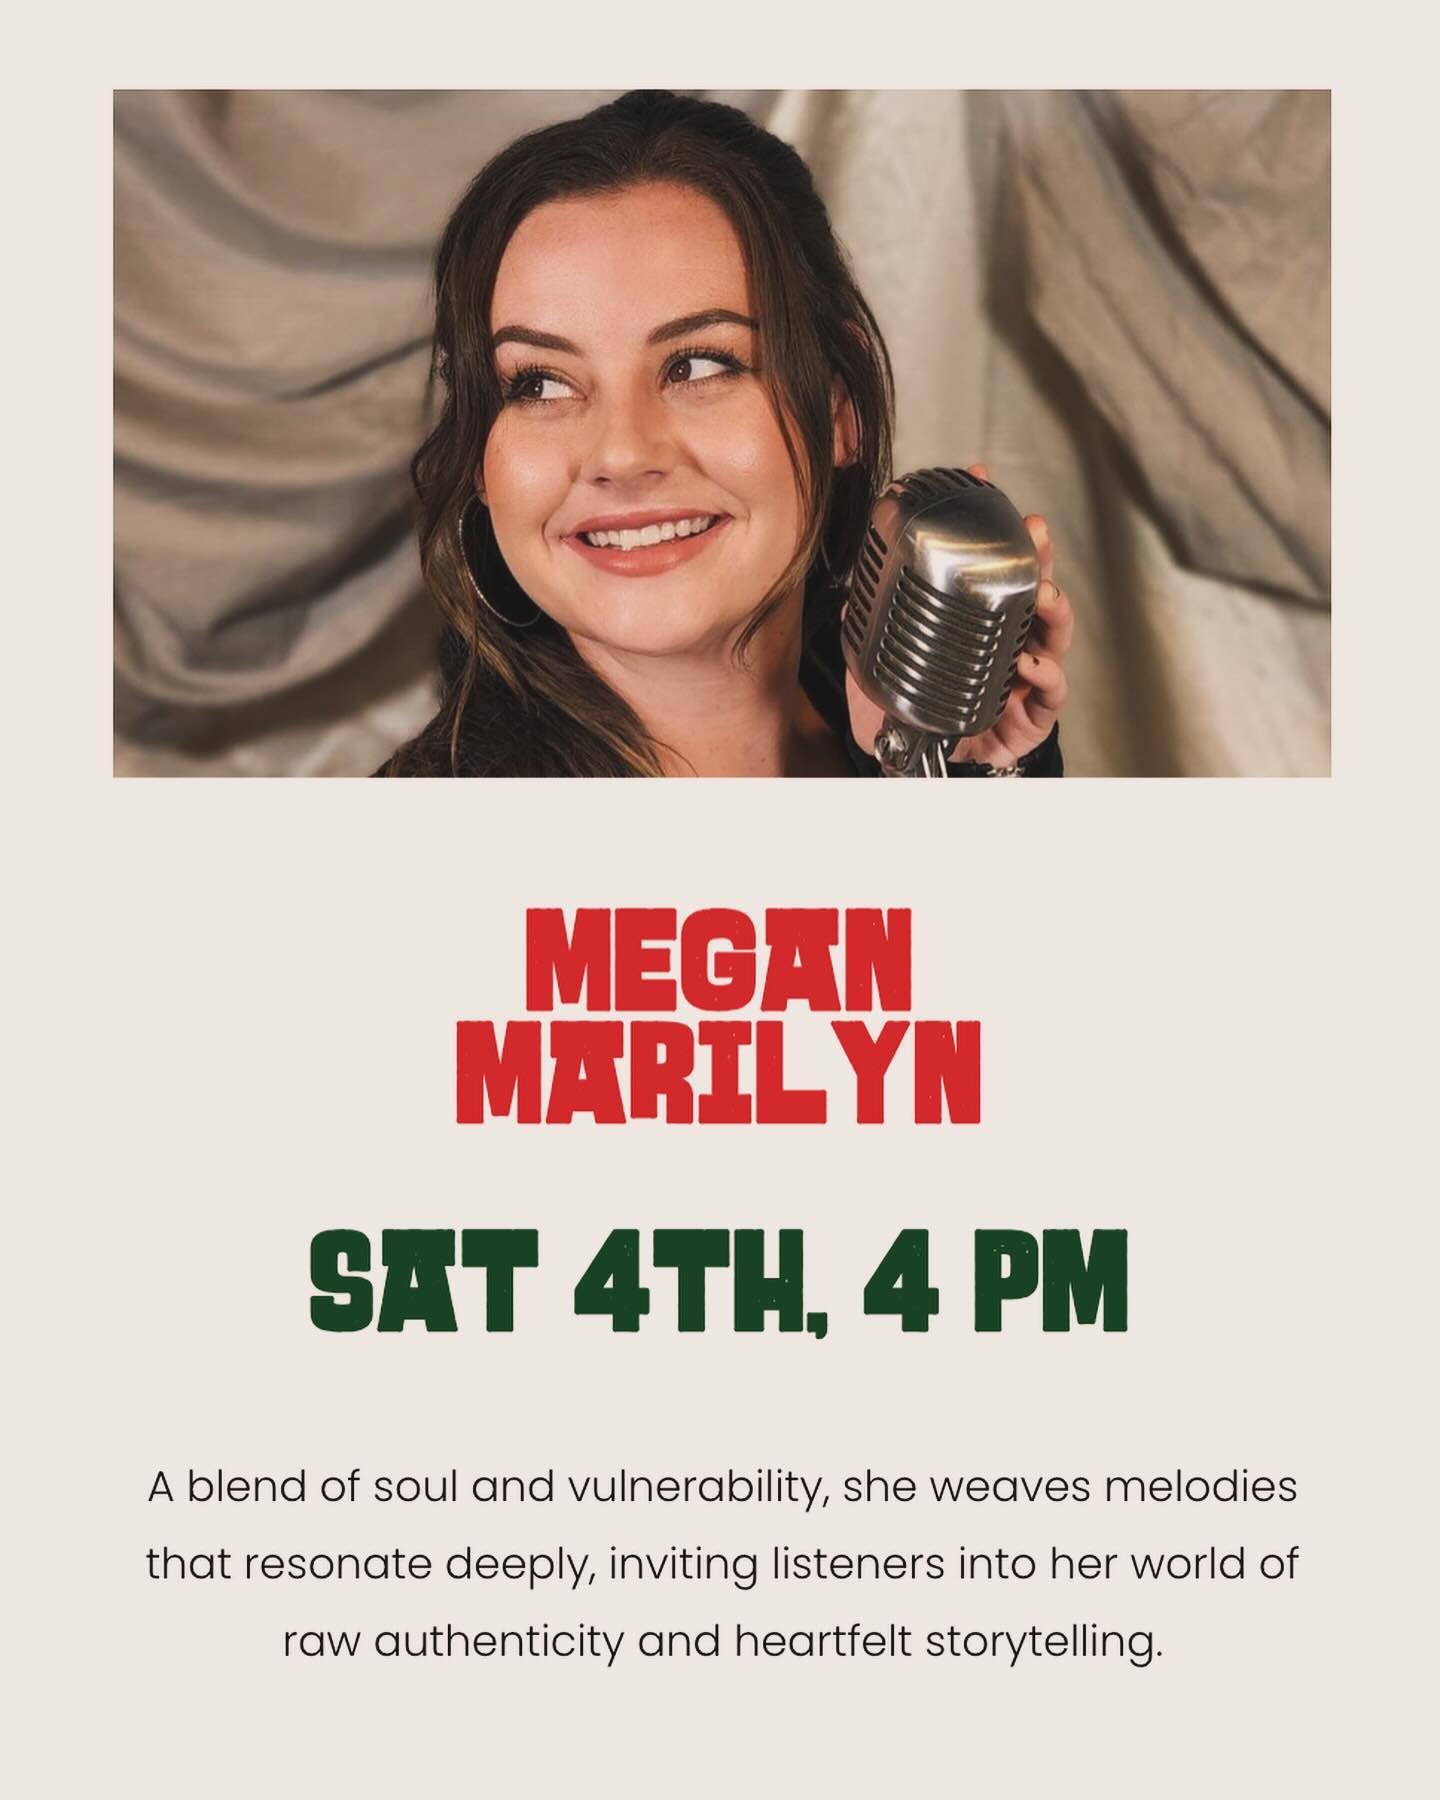 🌟 SAGEBRUSH CANTINA WEEKEND 🌟

THE WEEKND STARTS HERE! Join us for an unforgettable lineup of live music and beats that&rsquo;ll keep you dancing all night long!

🎤 SAT 4th

Megan Marilyn | 4 PM | Soulful melodies and heartfelt storytelling!
THE J